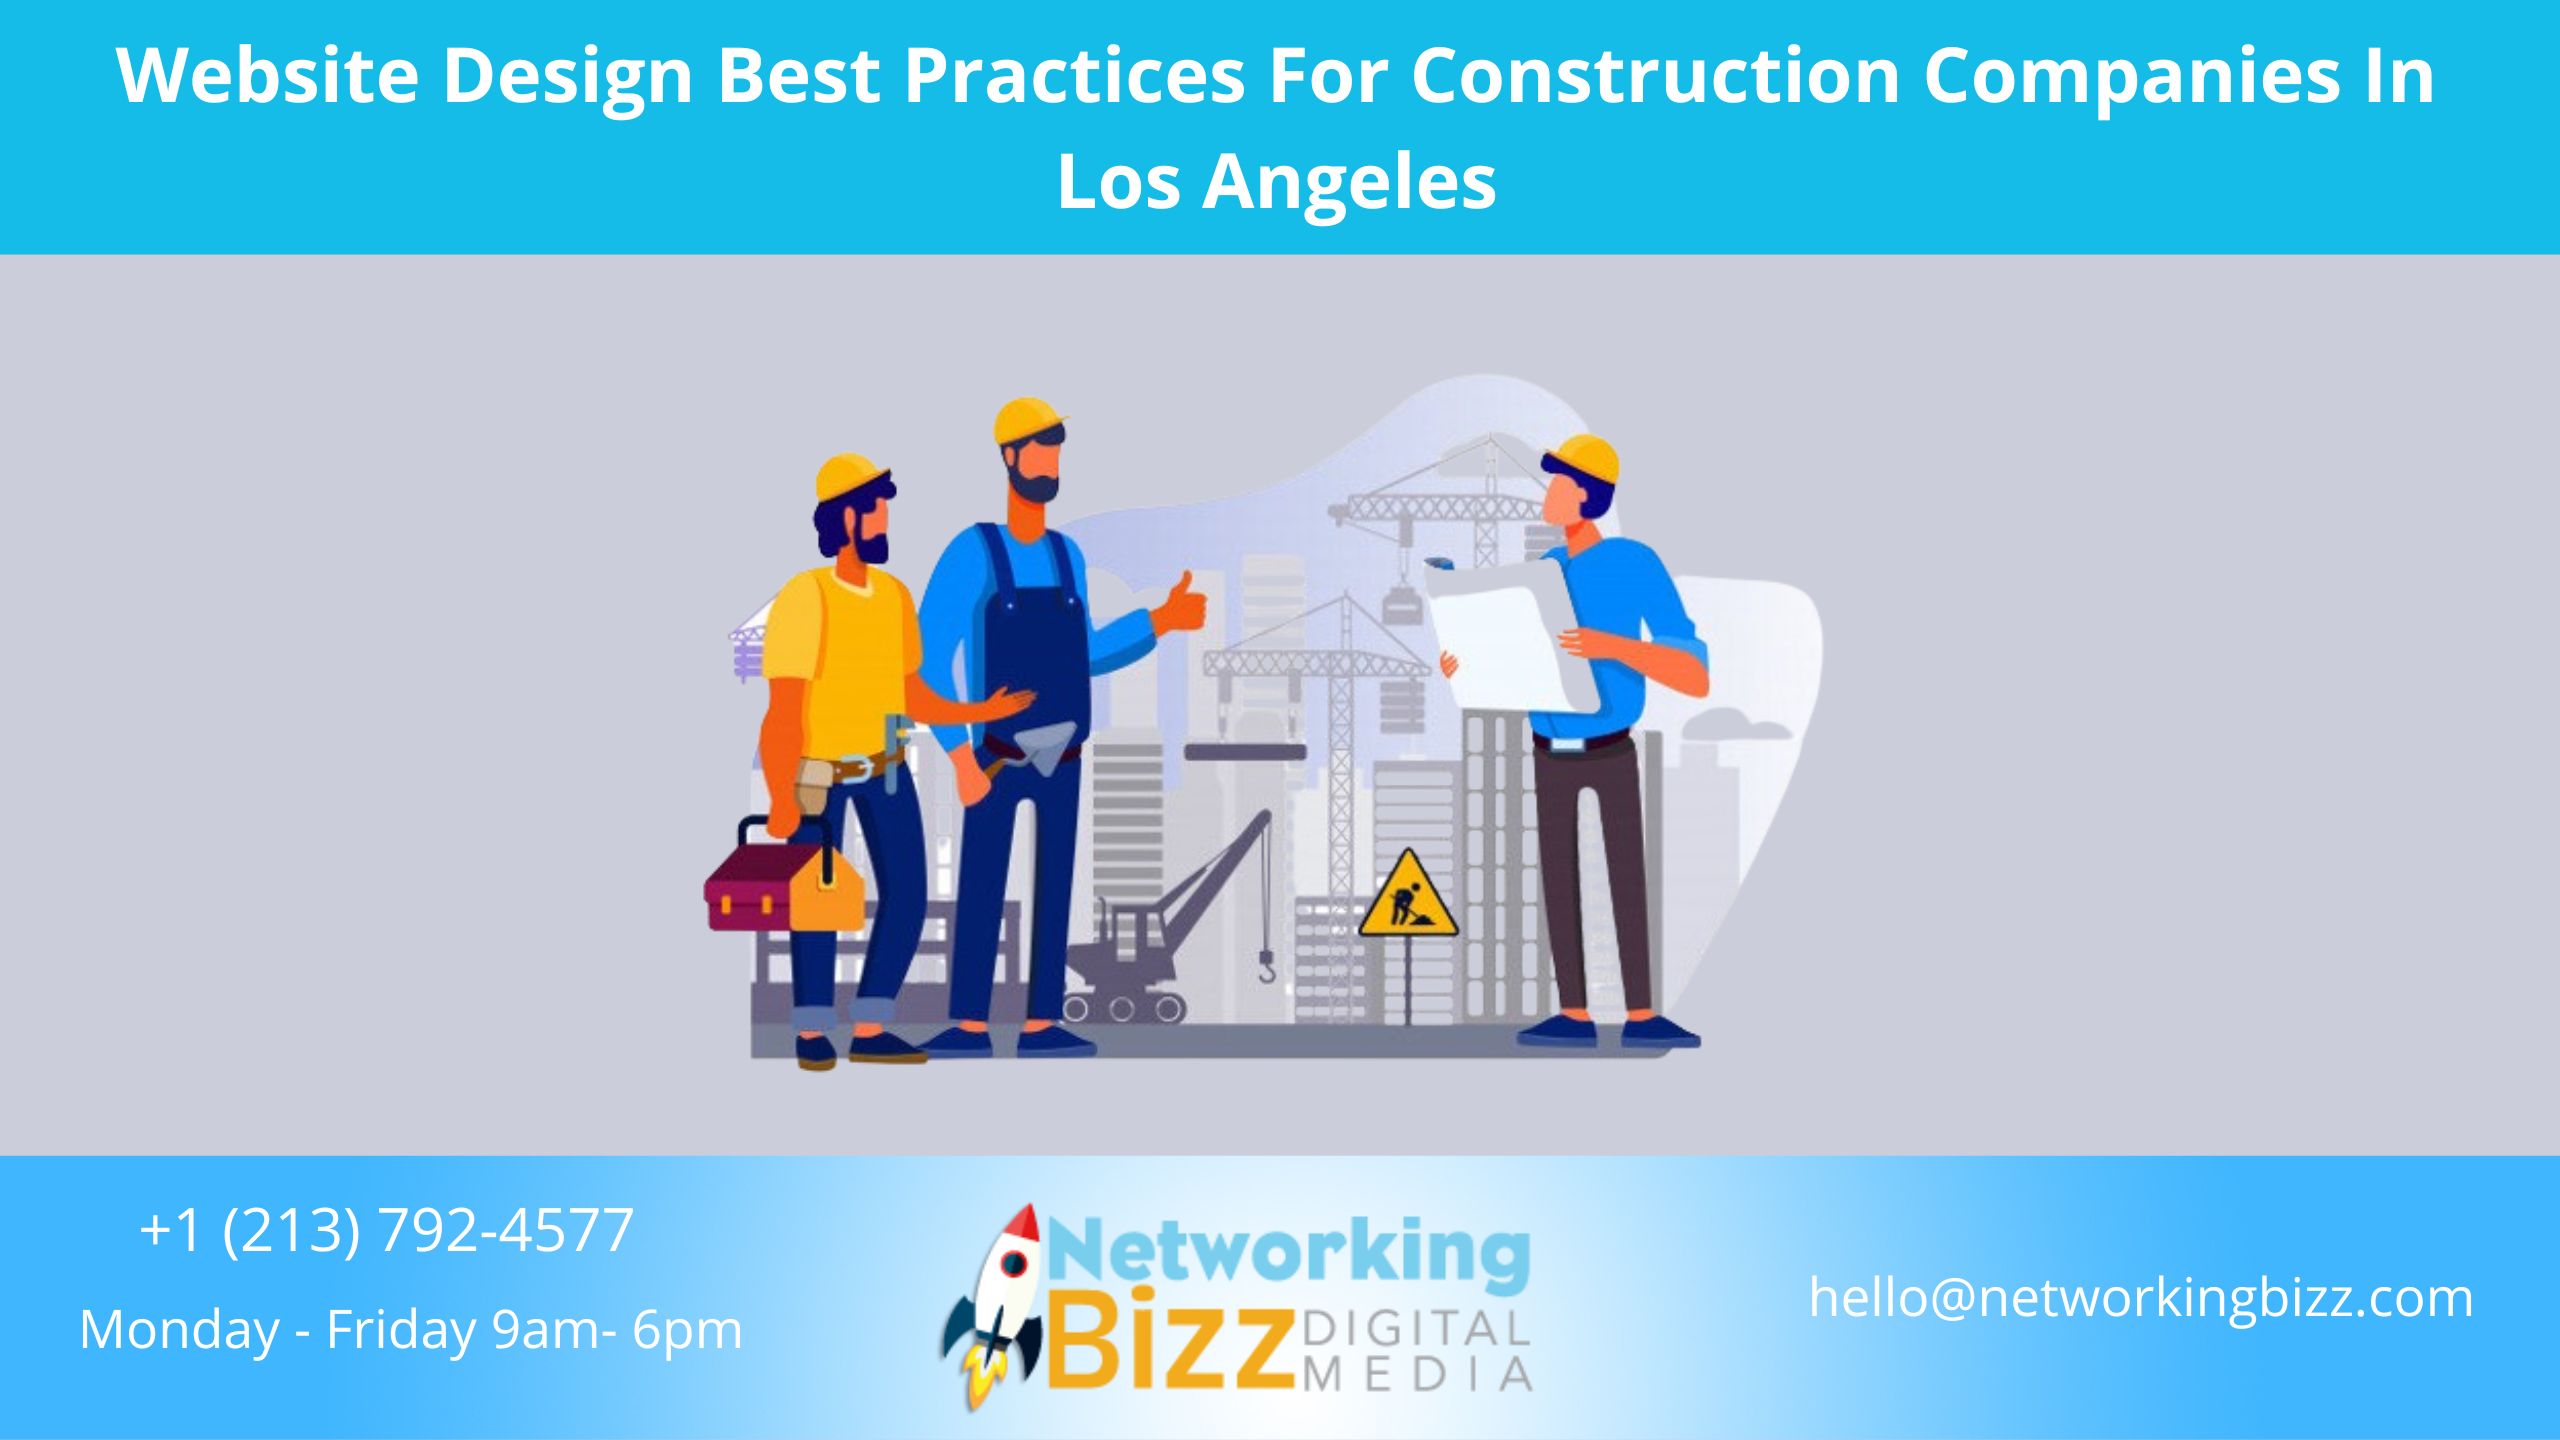 Website Design Best Practices For Construction Companies In Los Angeles